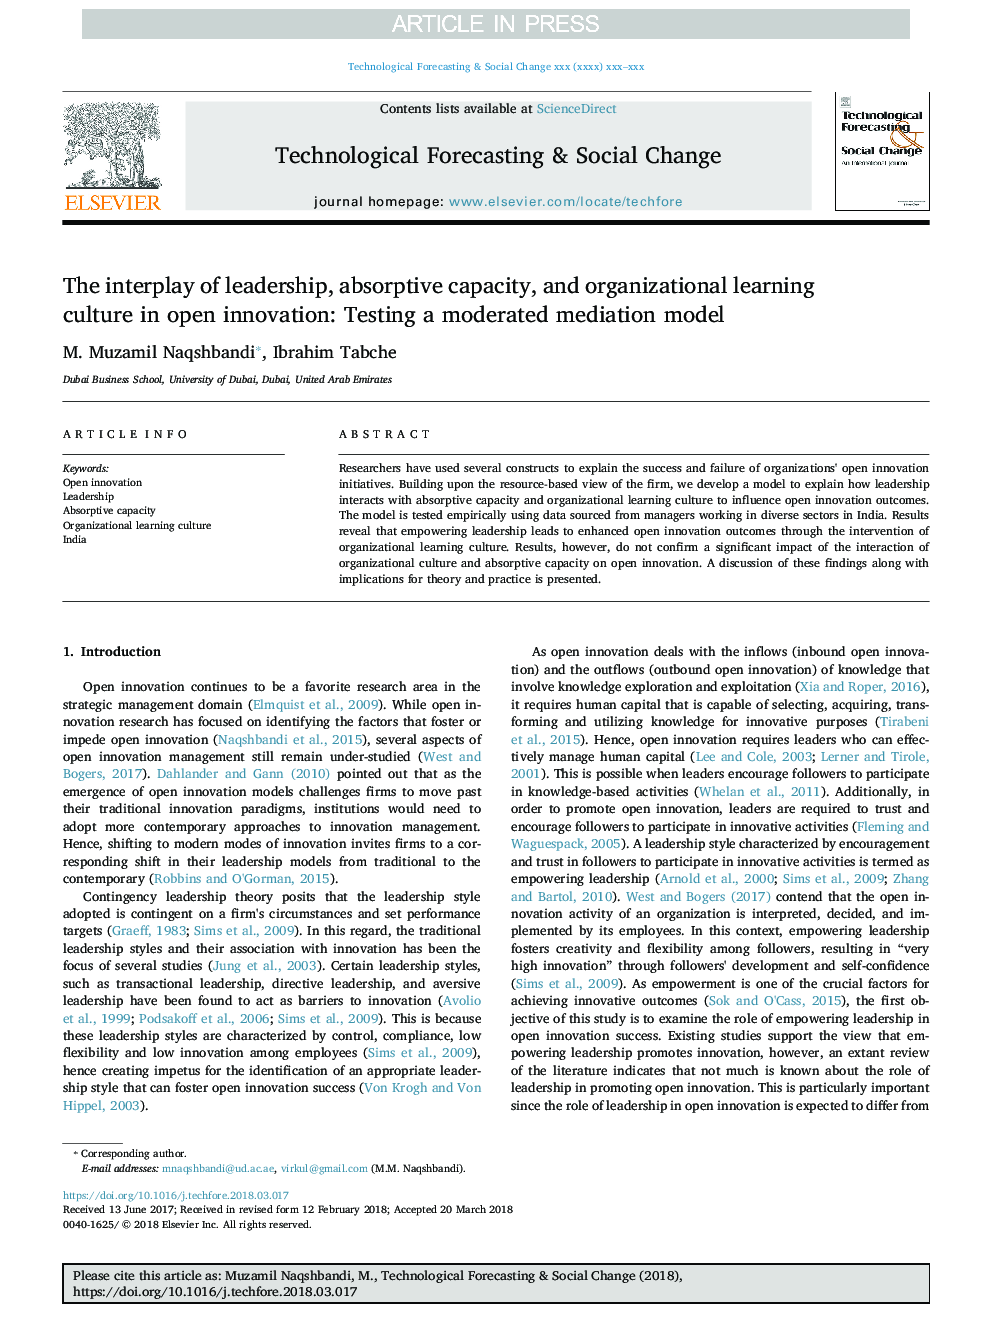 The interplay of leadership, absorptive capacity, and organizational learning culture in open innovation: Testing a moderated mediation model